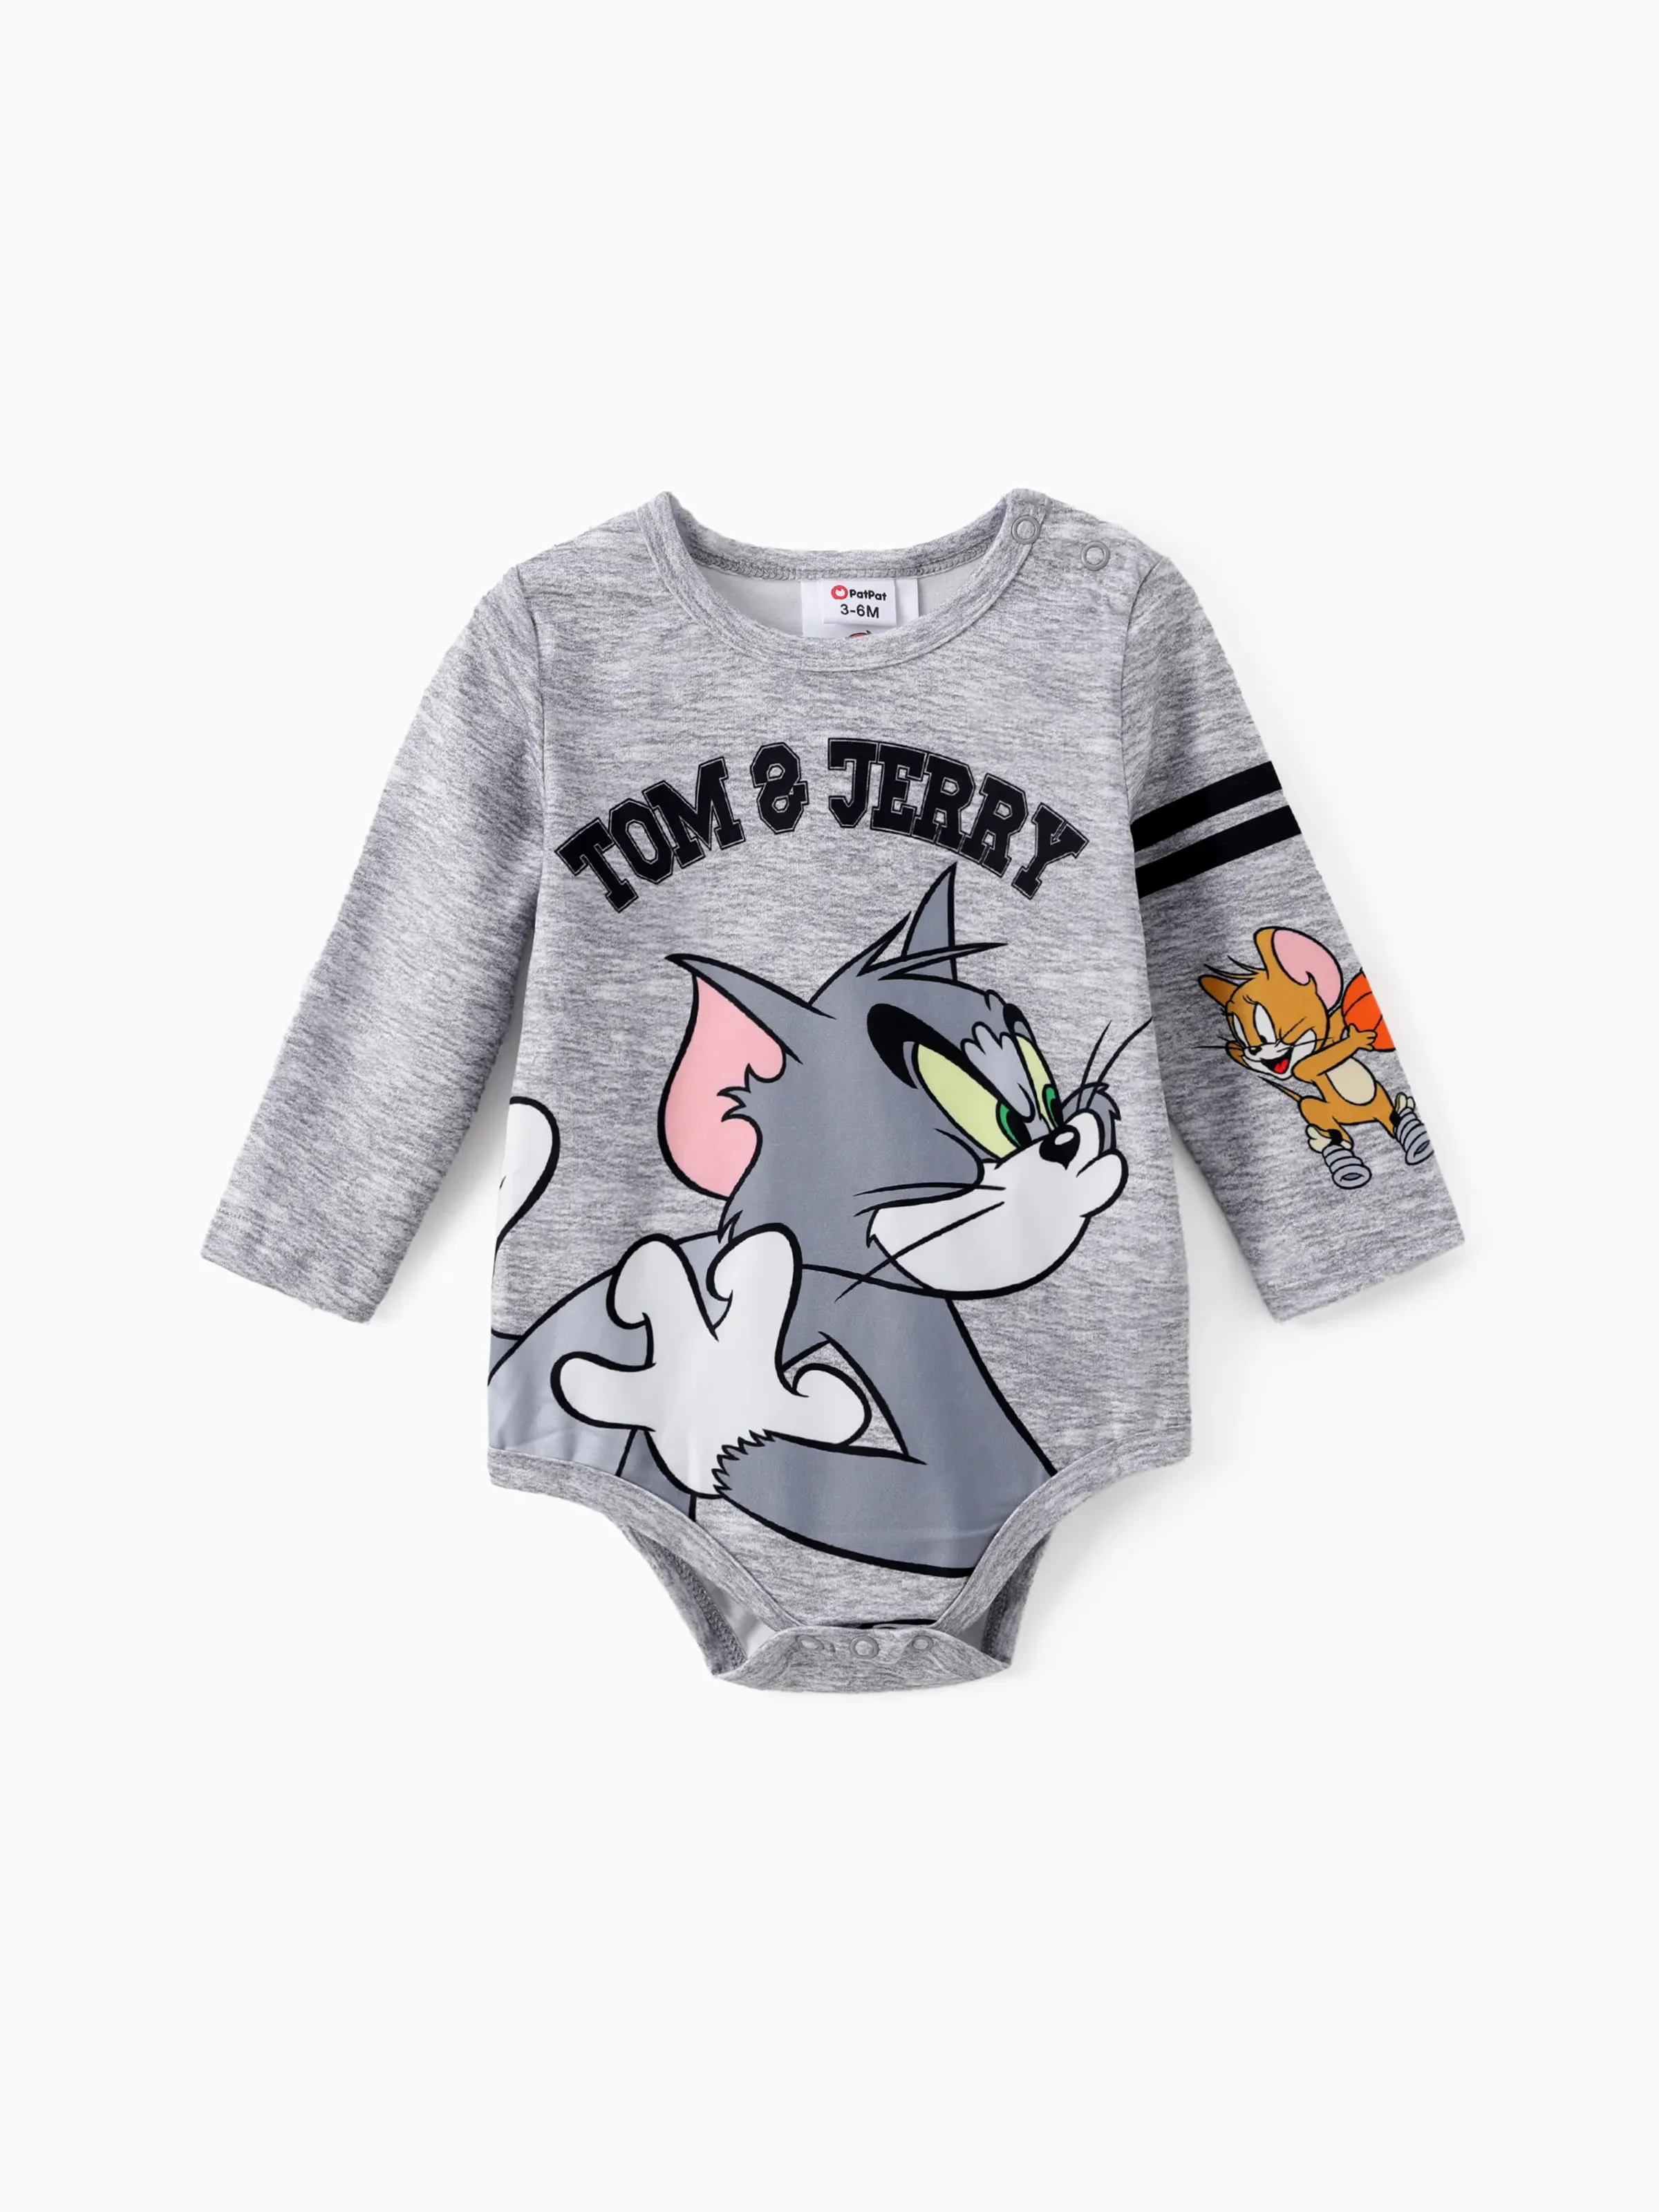 

Tom and Jerry Baby Boy Character Print Long-sleeve Bodysuit